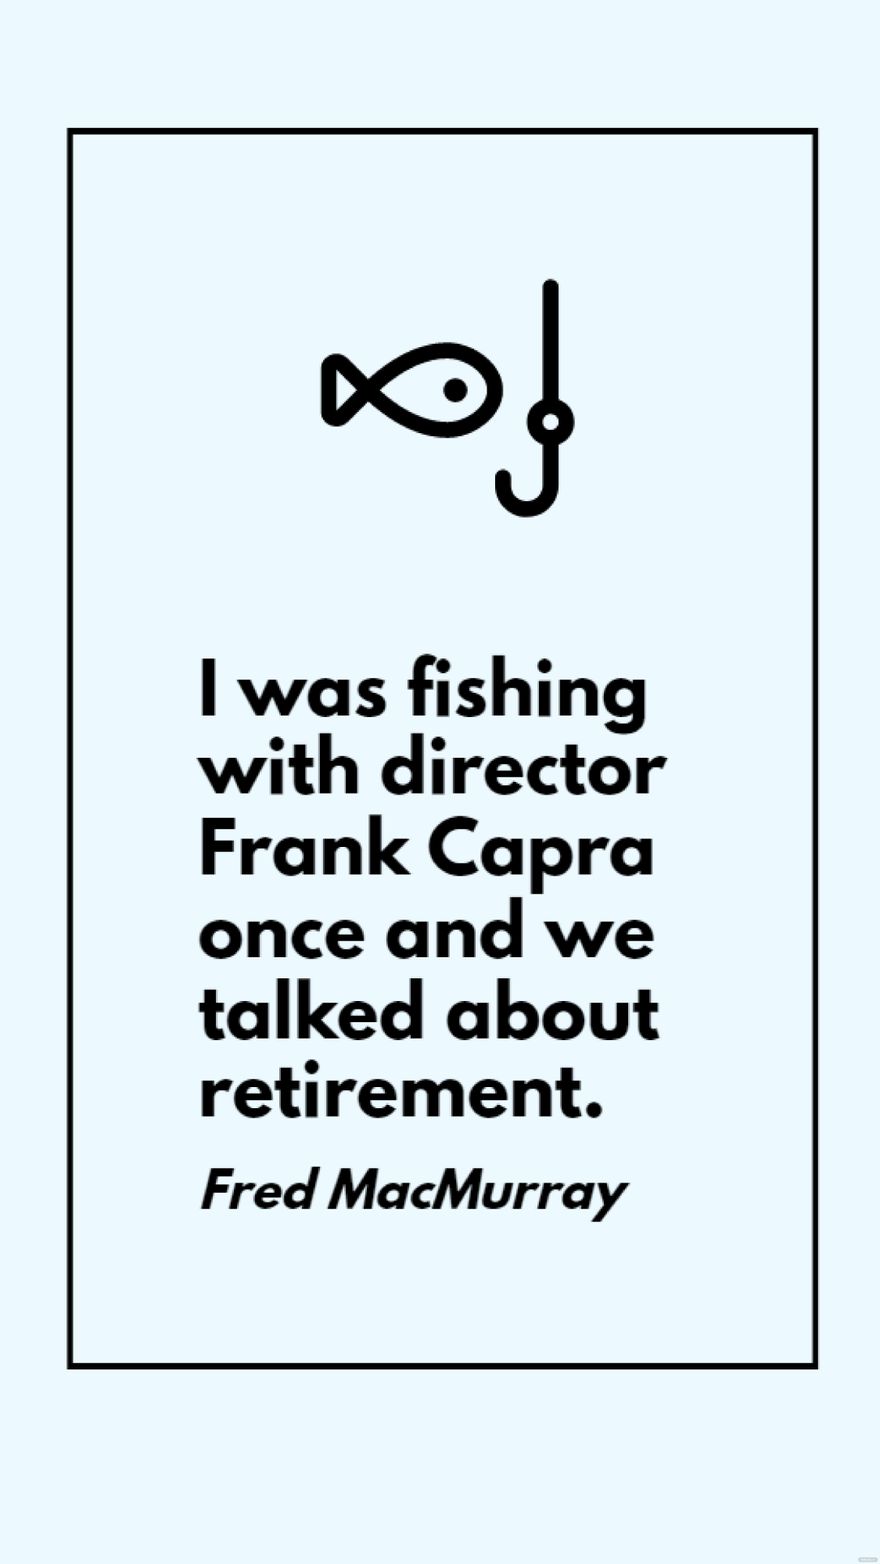 Free Fred MacMurray - I was fishing with director Frank Capra once and we talked about retirement.